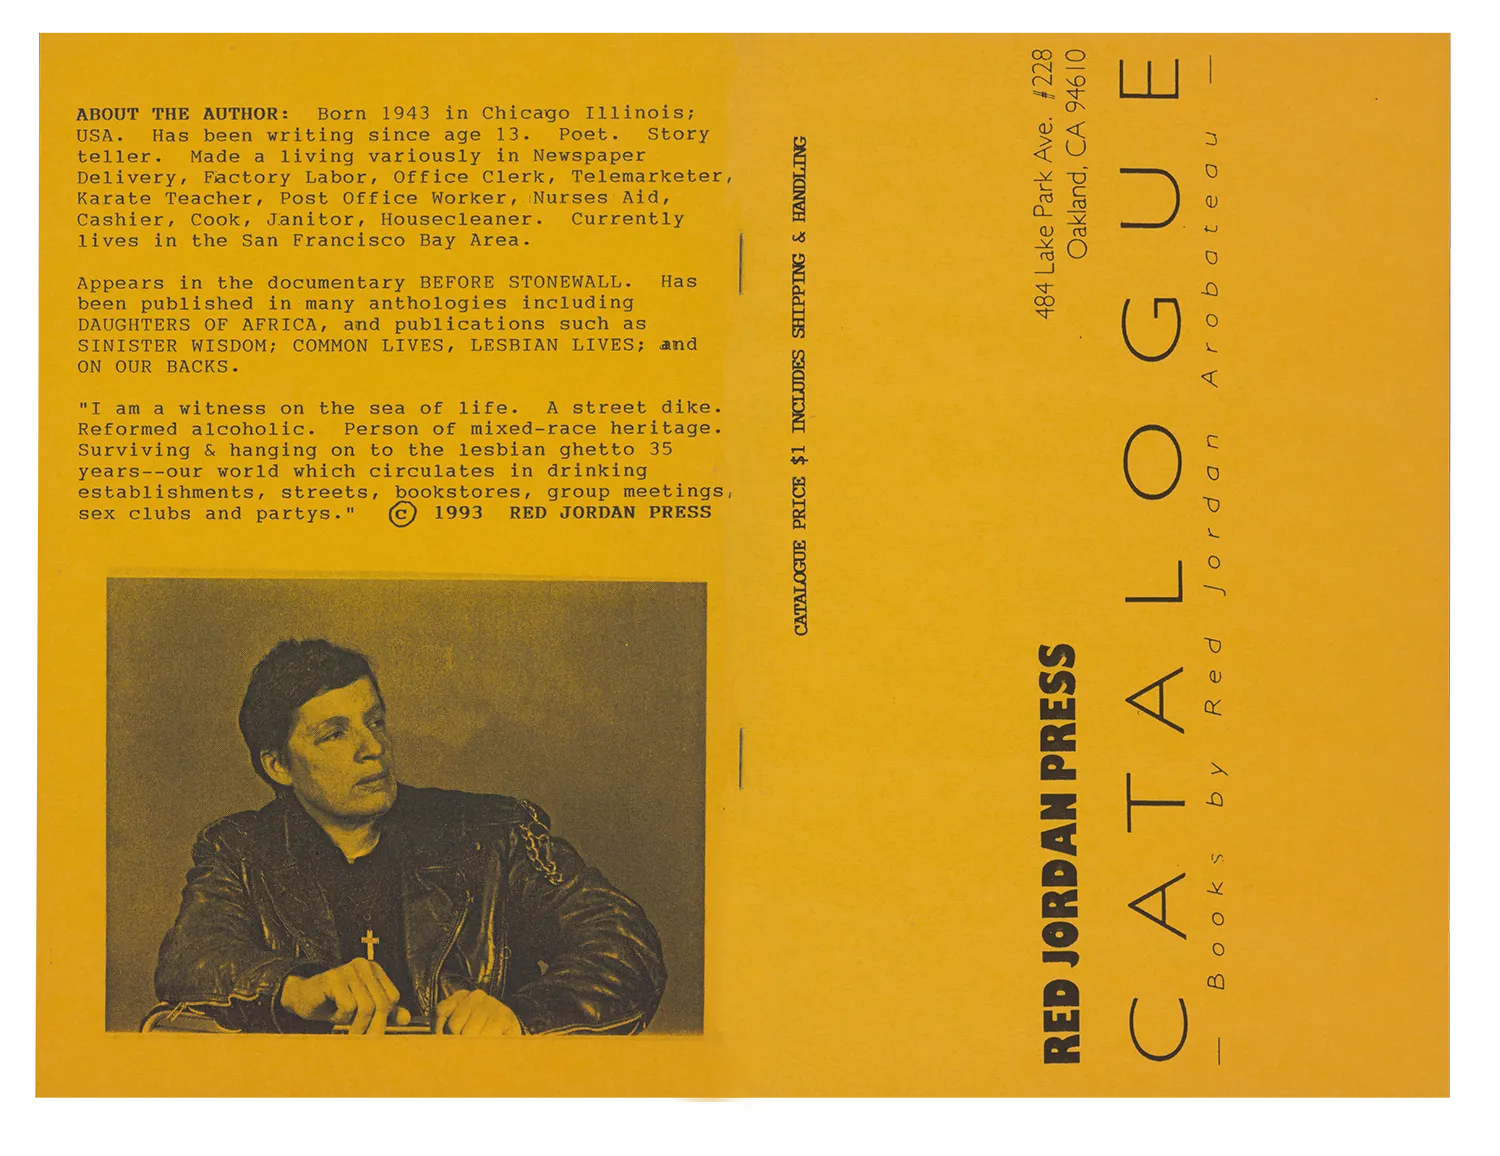 The front and back cover of a yellow catalog with black letters. Underneath the text is an image of Red Jordan Arobateau looking to the side wearing a black leather jacket and a cross.